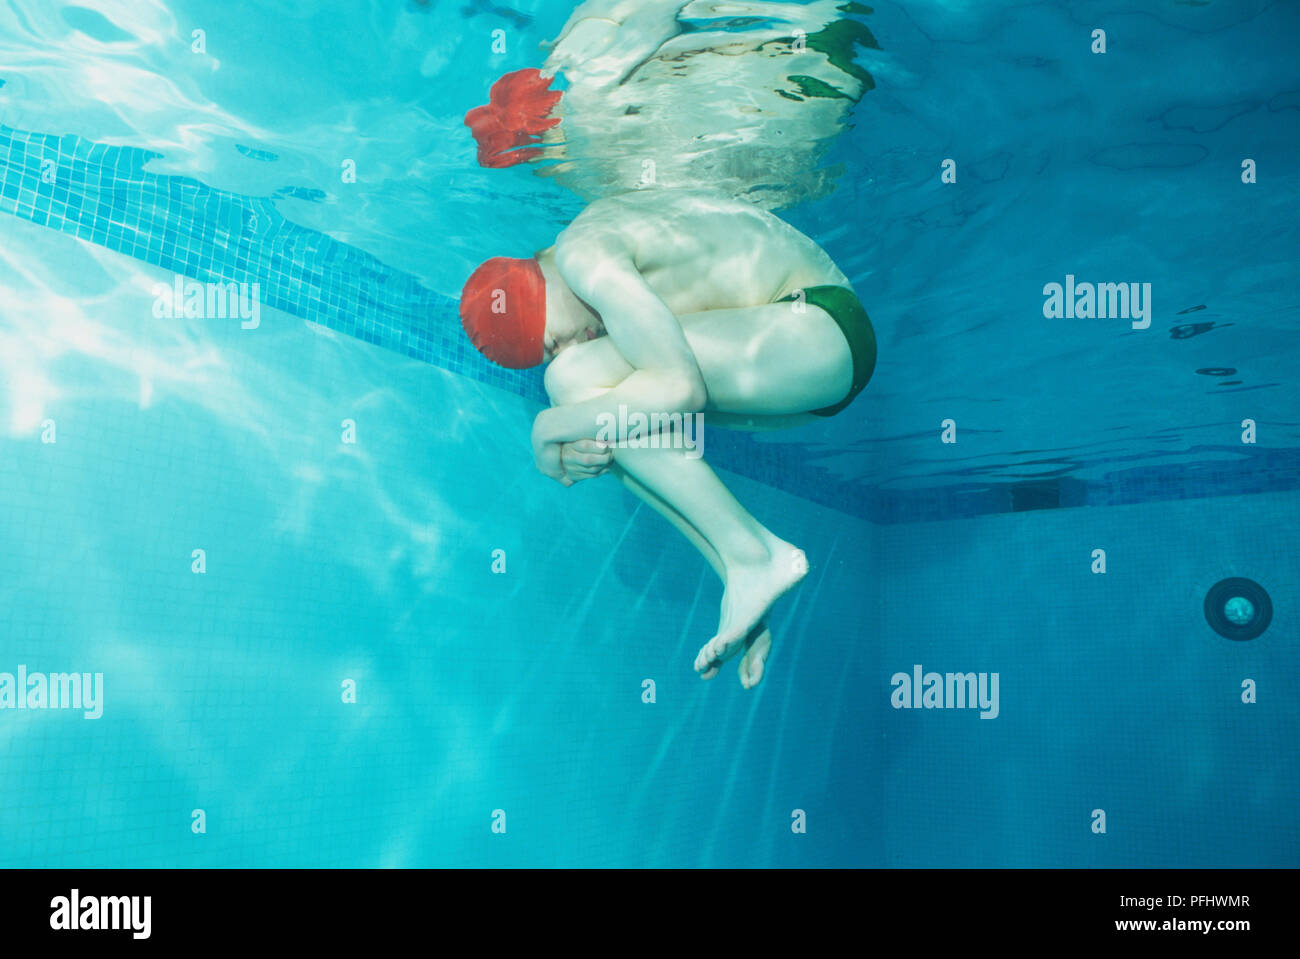 Teenage boy in green swimming trunks and red cap curling forward in foetal position under water, low angle view Stock Photo